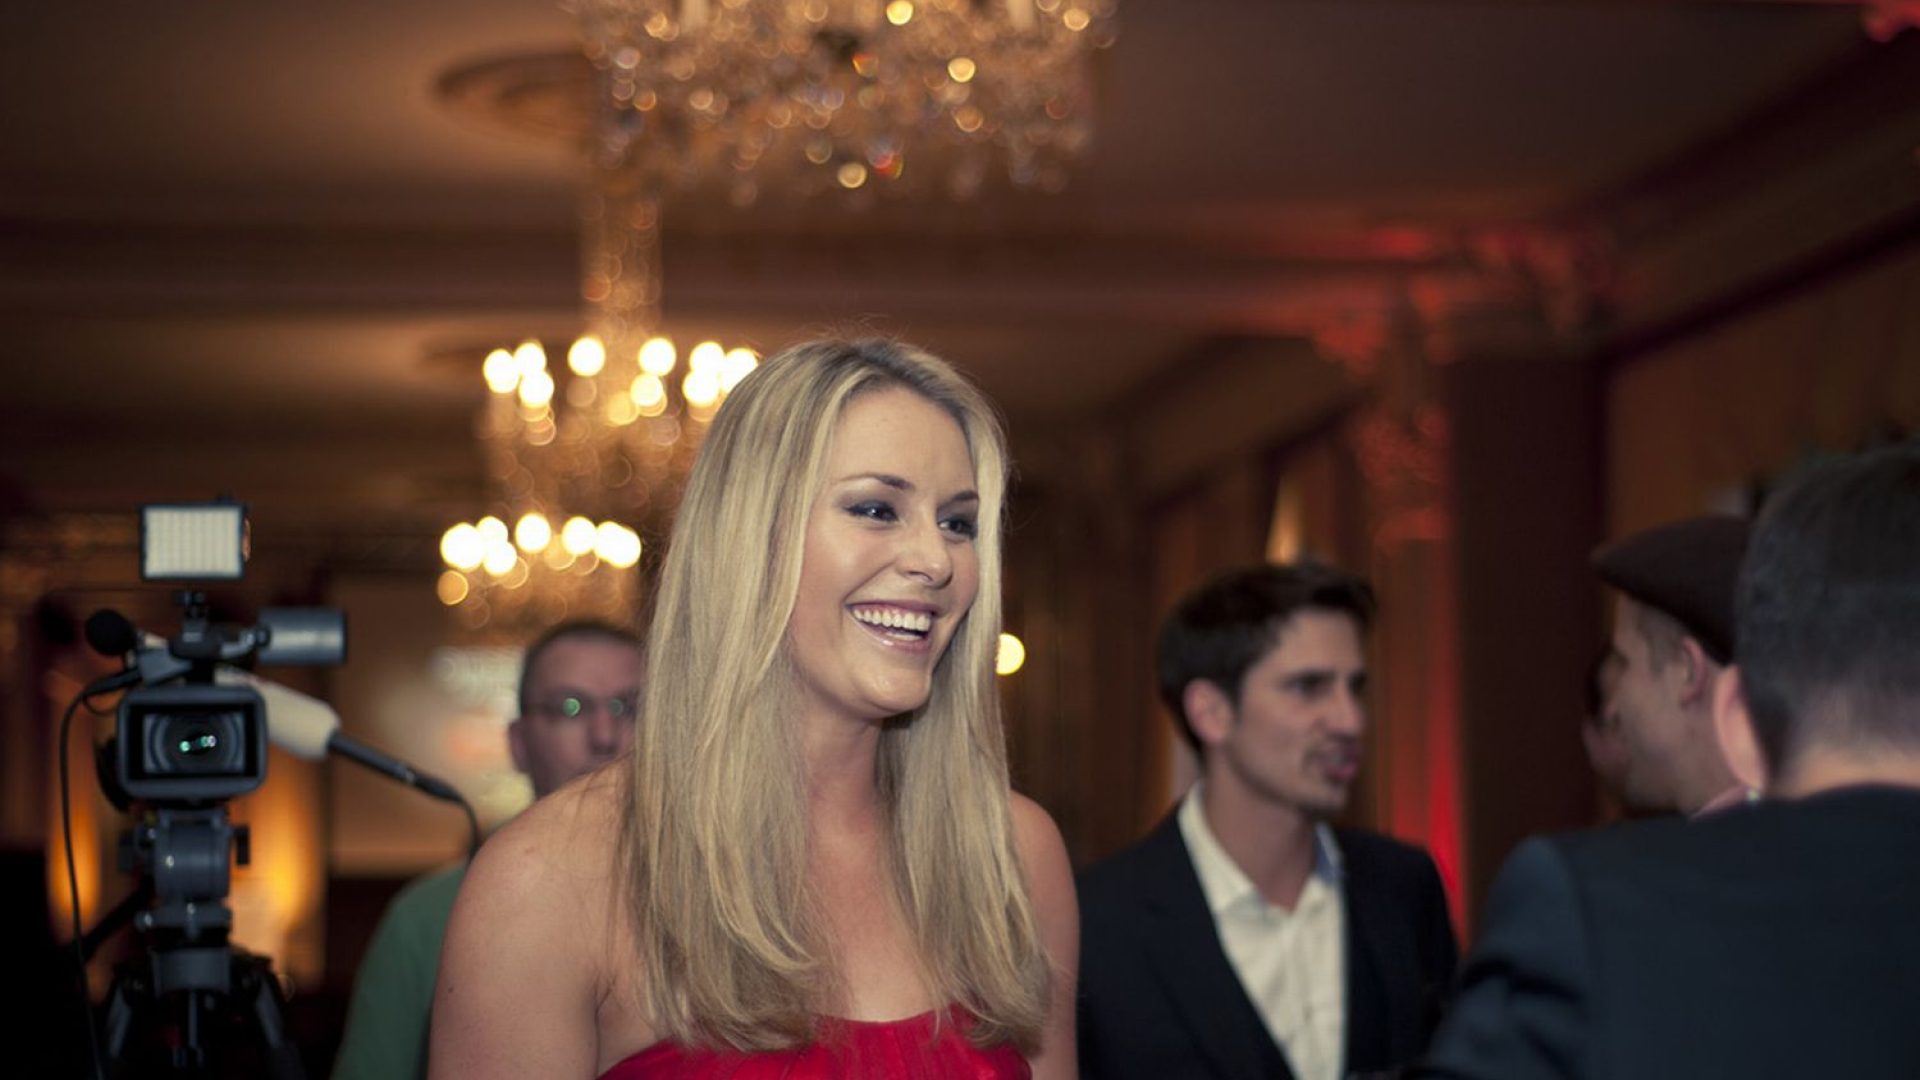 Lindsey Vonn receives "Preis Herbert" for her work in promoting the Alps and the sport of alpine skiing. Lindsey is the first female, first non-European and the youngest person ever to receive this award.